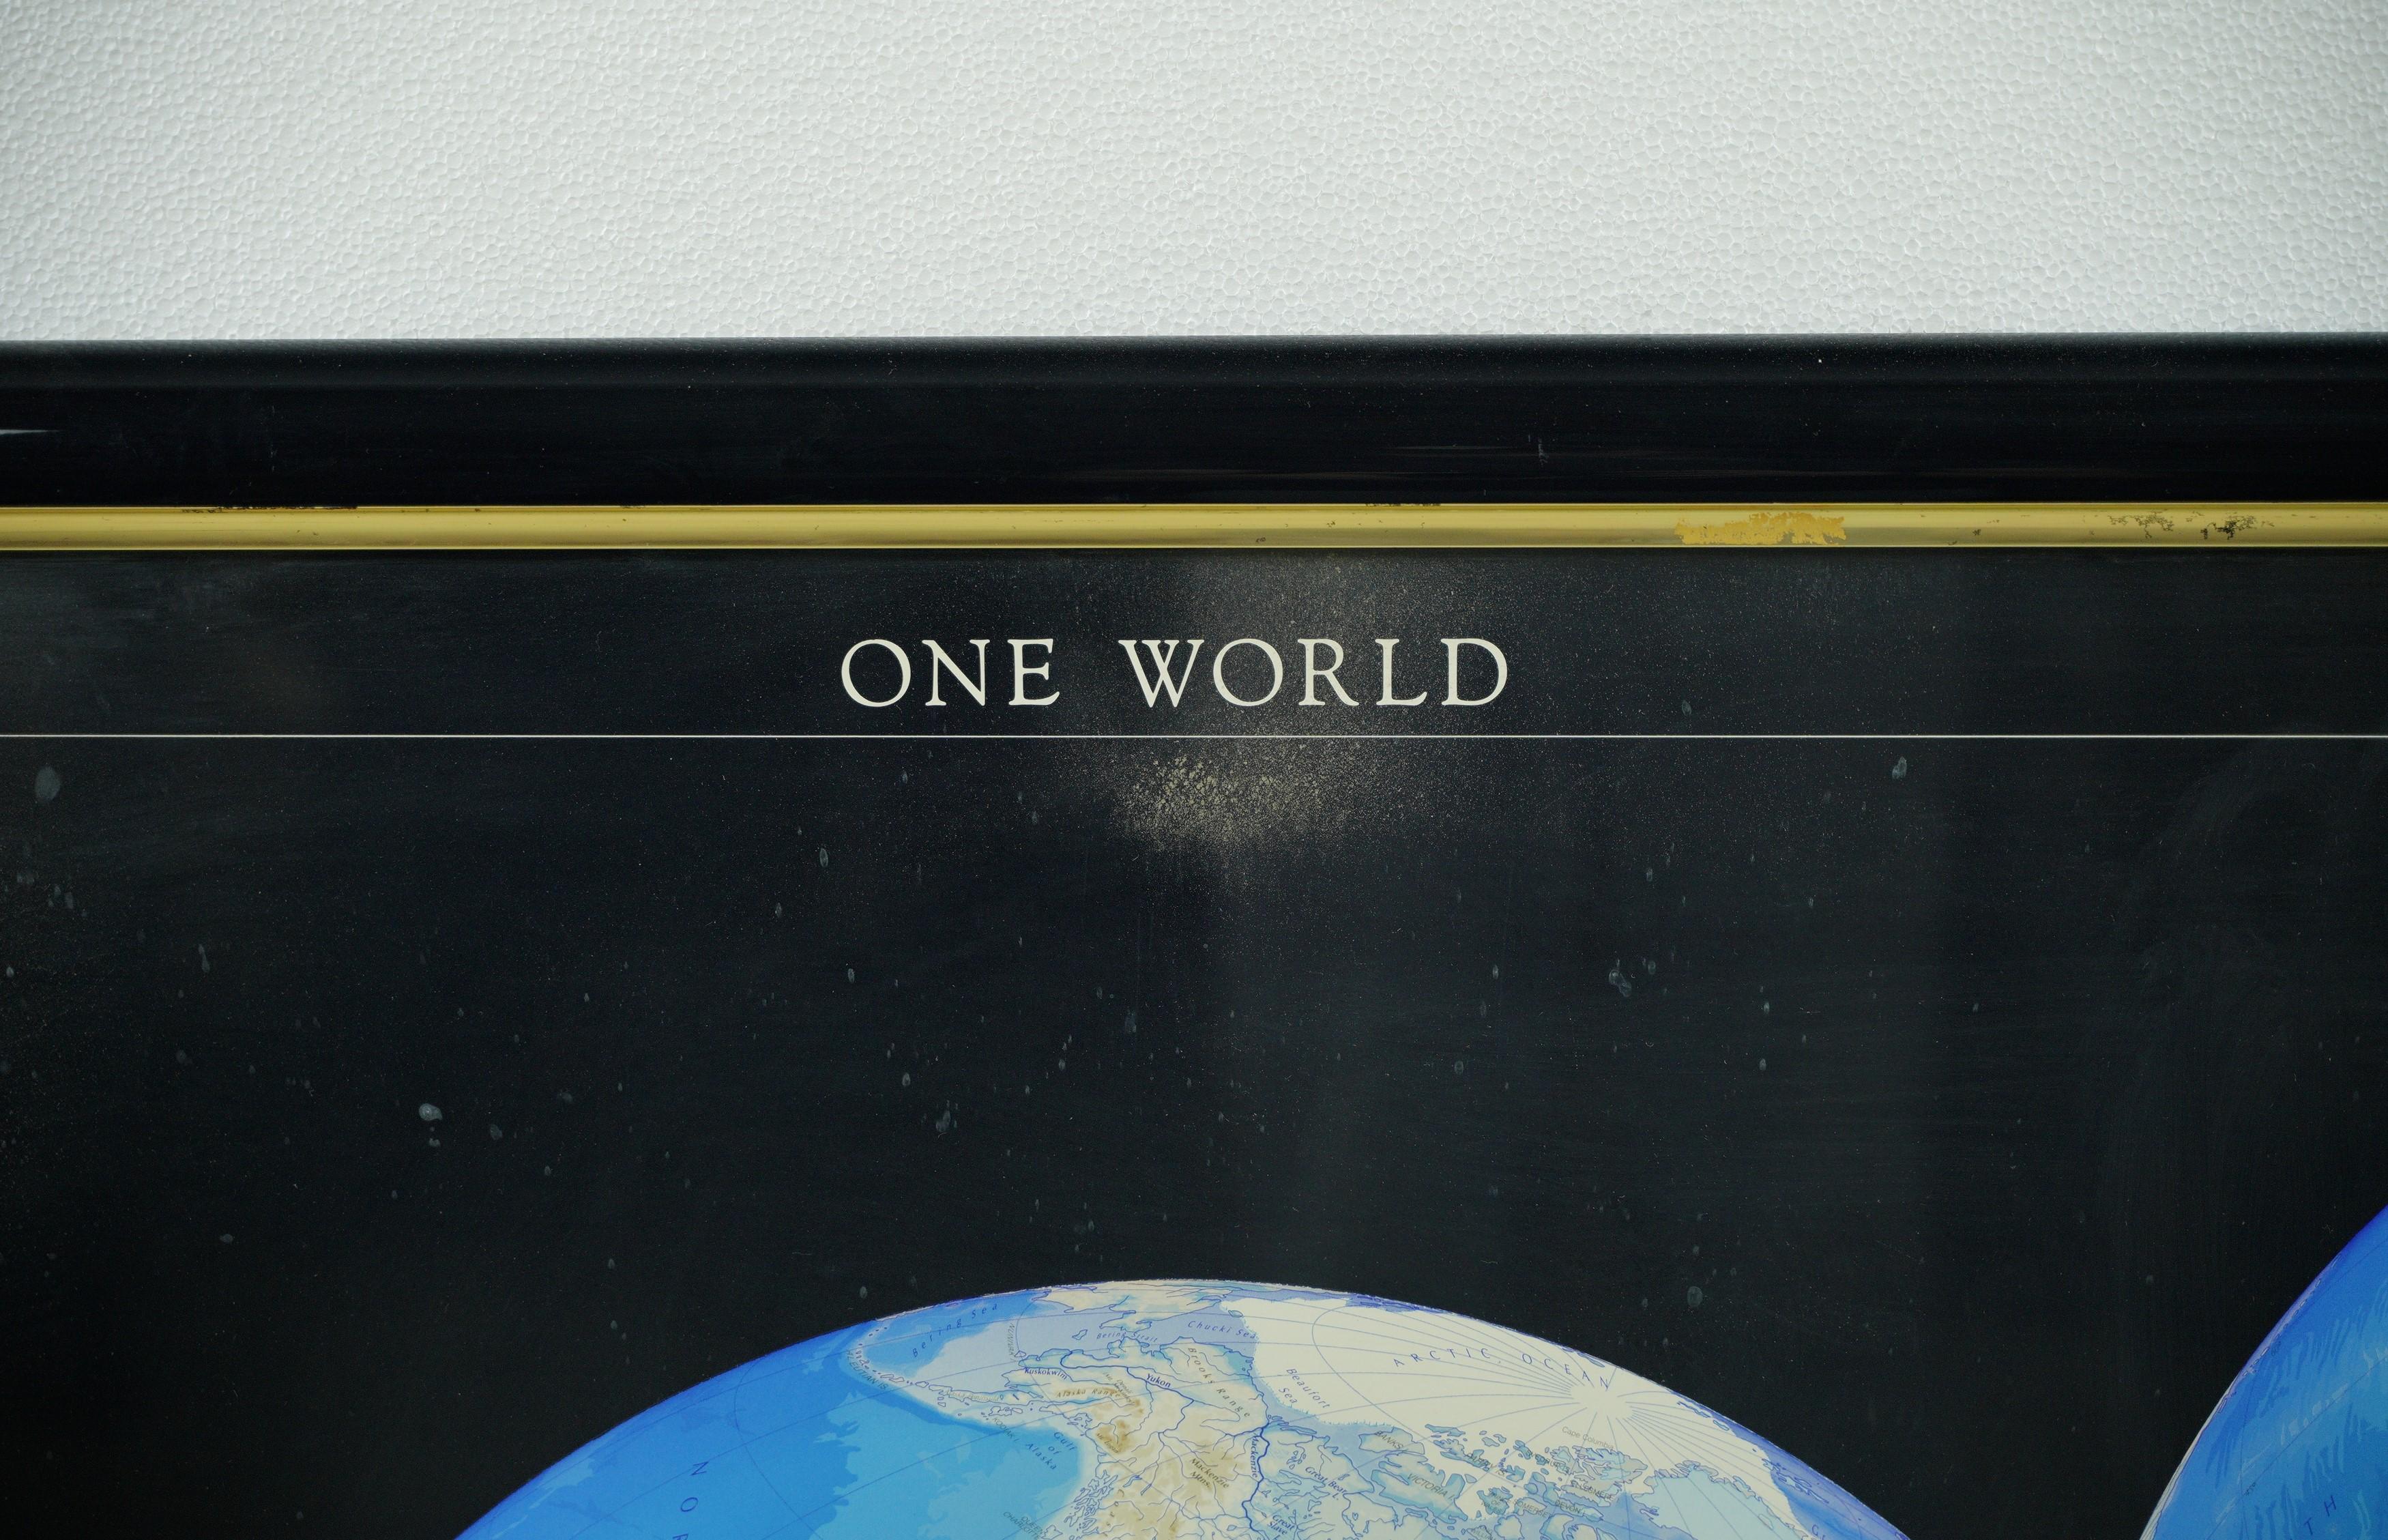 This decorative poster features a map of the Earth with a unique triple perspective view. It is enclosed in a black plastic frame, and the glass covering the poster is still intact. This particular map was produced by Raven Maps & Images in 1990.